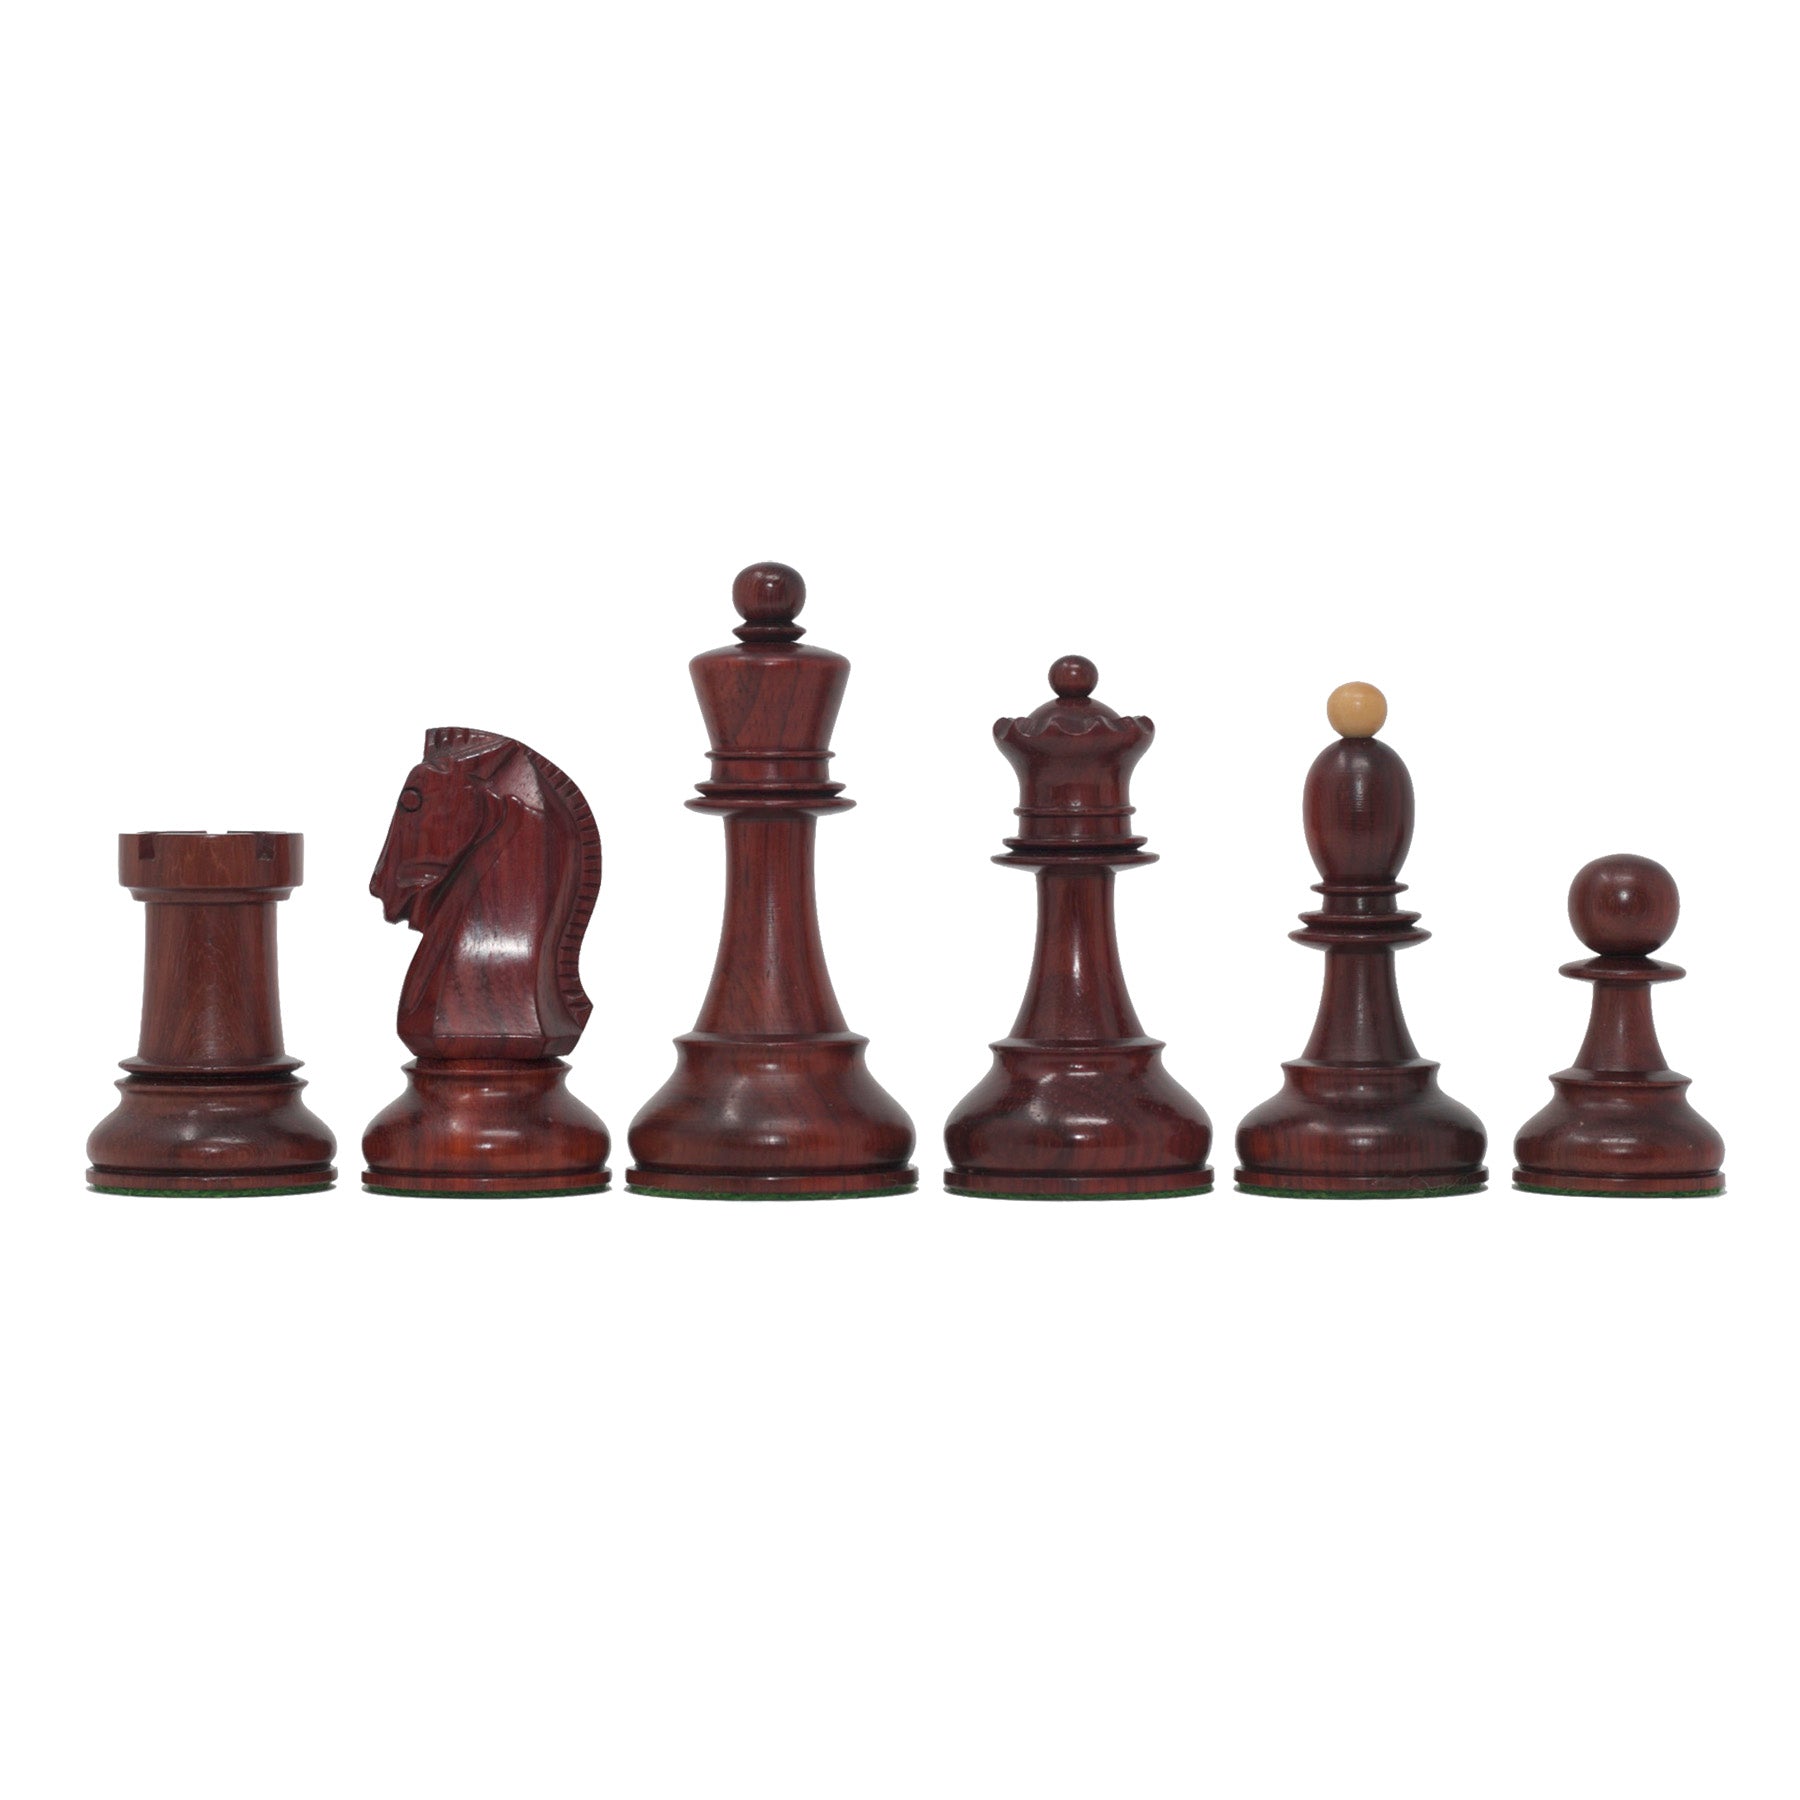 Dubrovnik 1950 Vintage 3.75" Reproduction Chess Set in Padouk Wood